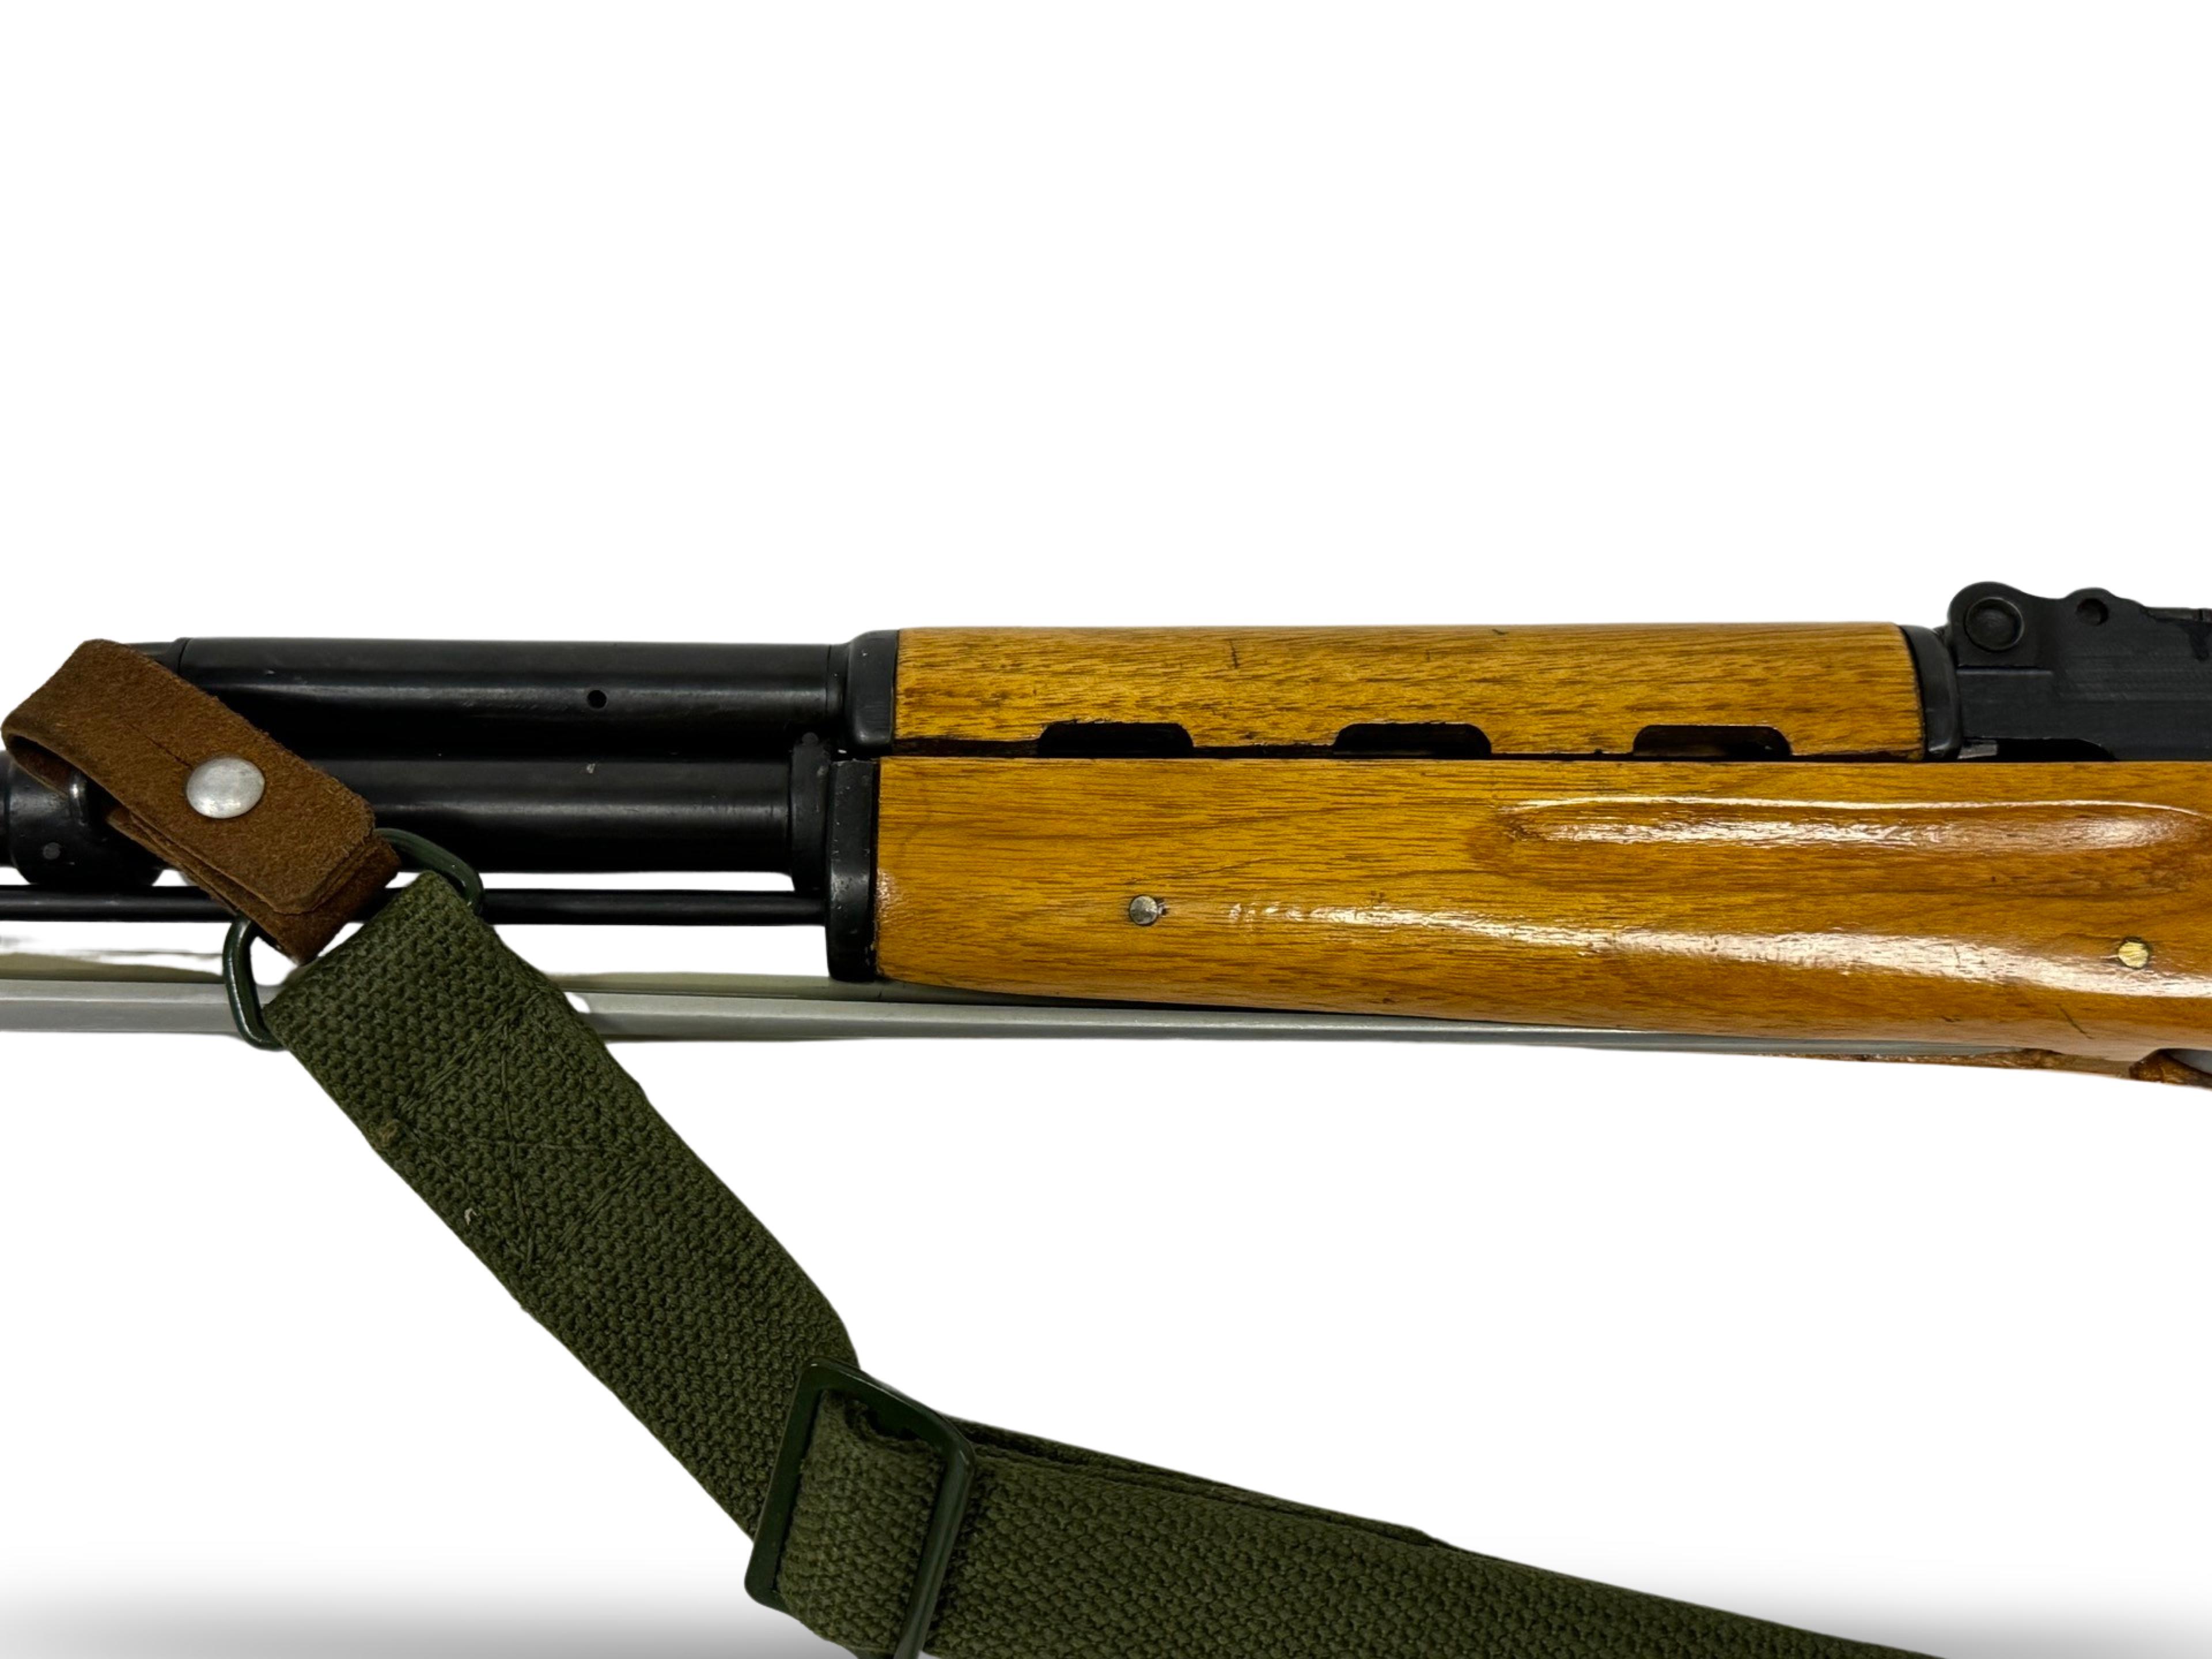 Excellent Norinco Chinese SKS 7.62x39mm Semi-Automatic Rifle with Spiked Bayonet and Sling